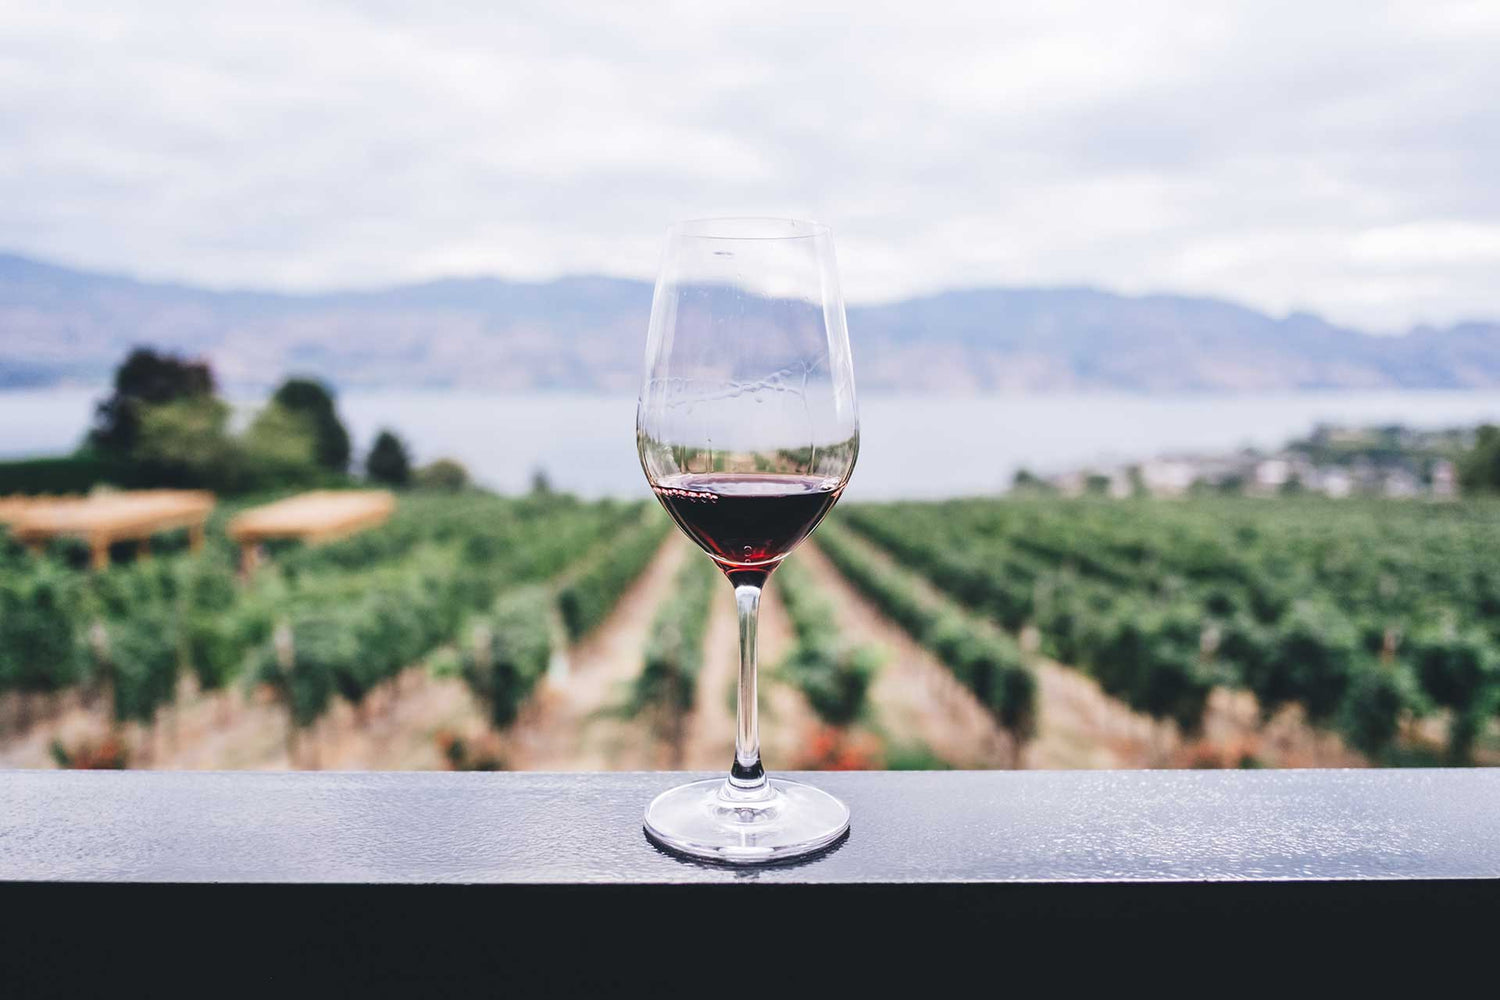 Red wine glass in front of a vineyard.